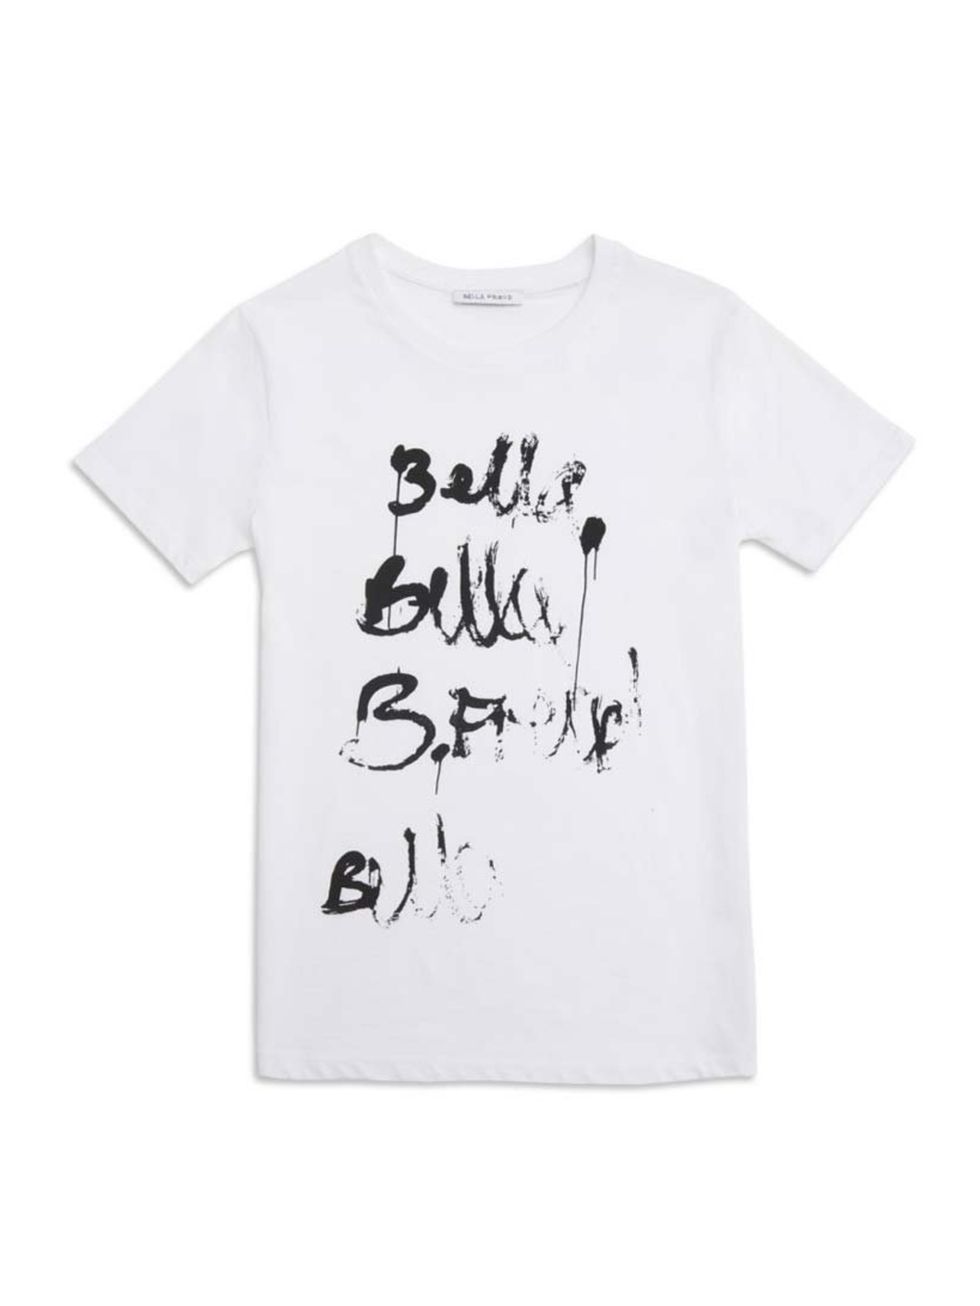 <p>Pair with tailored trousers, a boxy jacket and this season's biker boots.</p><p><a href="http://www.bellafreud.co.uk/shop/ss14/bella-bella-t-shirt-white/">Bella Freud</a> t-shirt, £85</p>